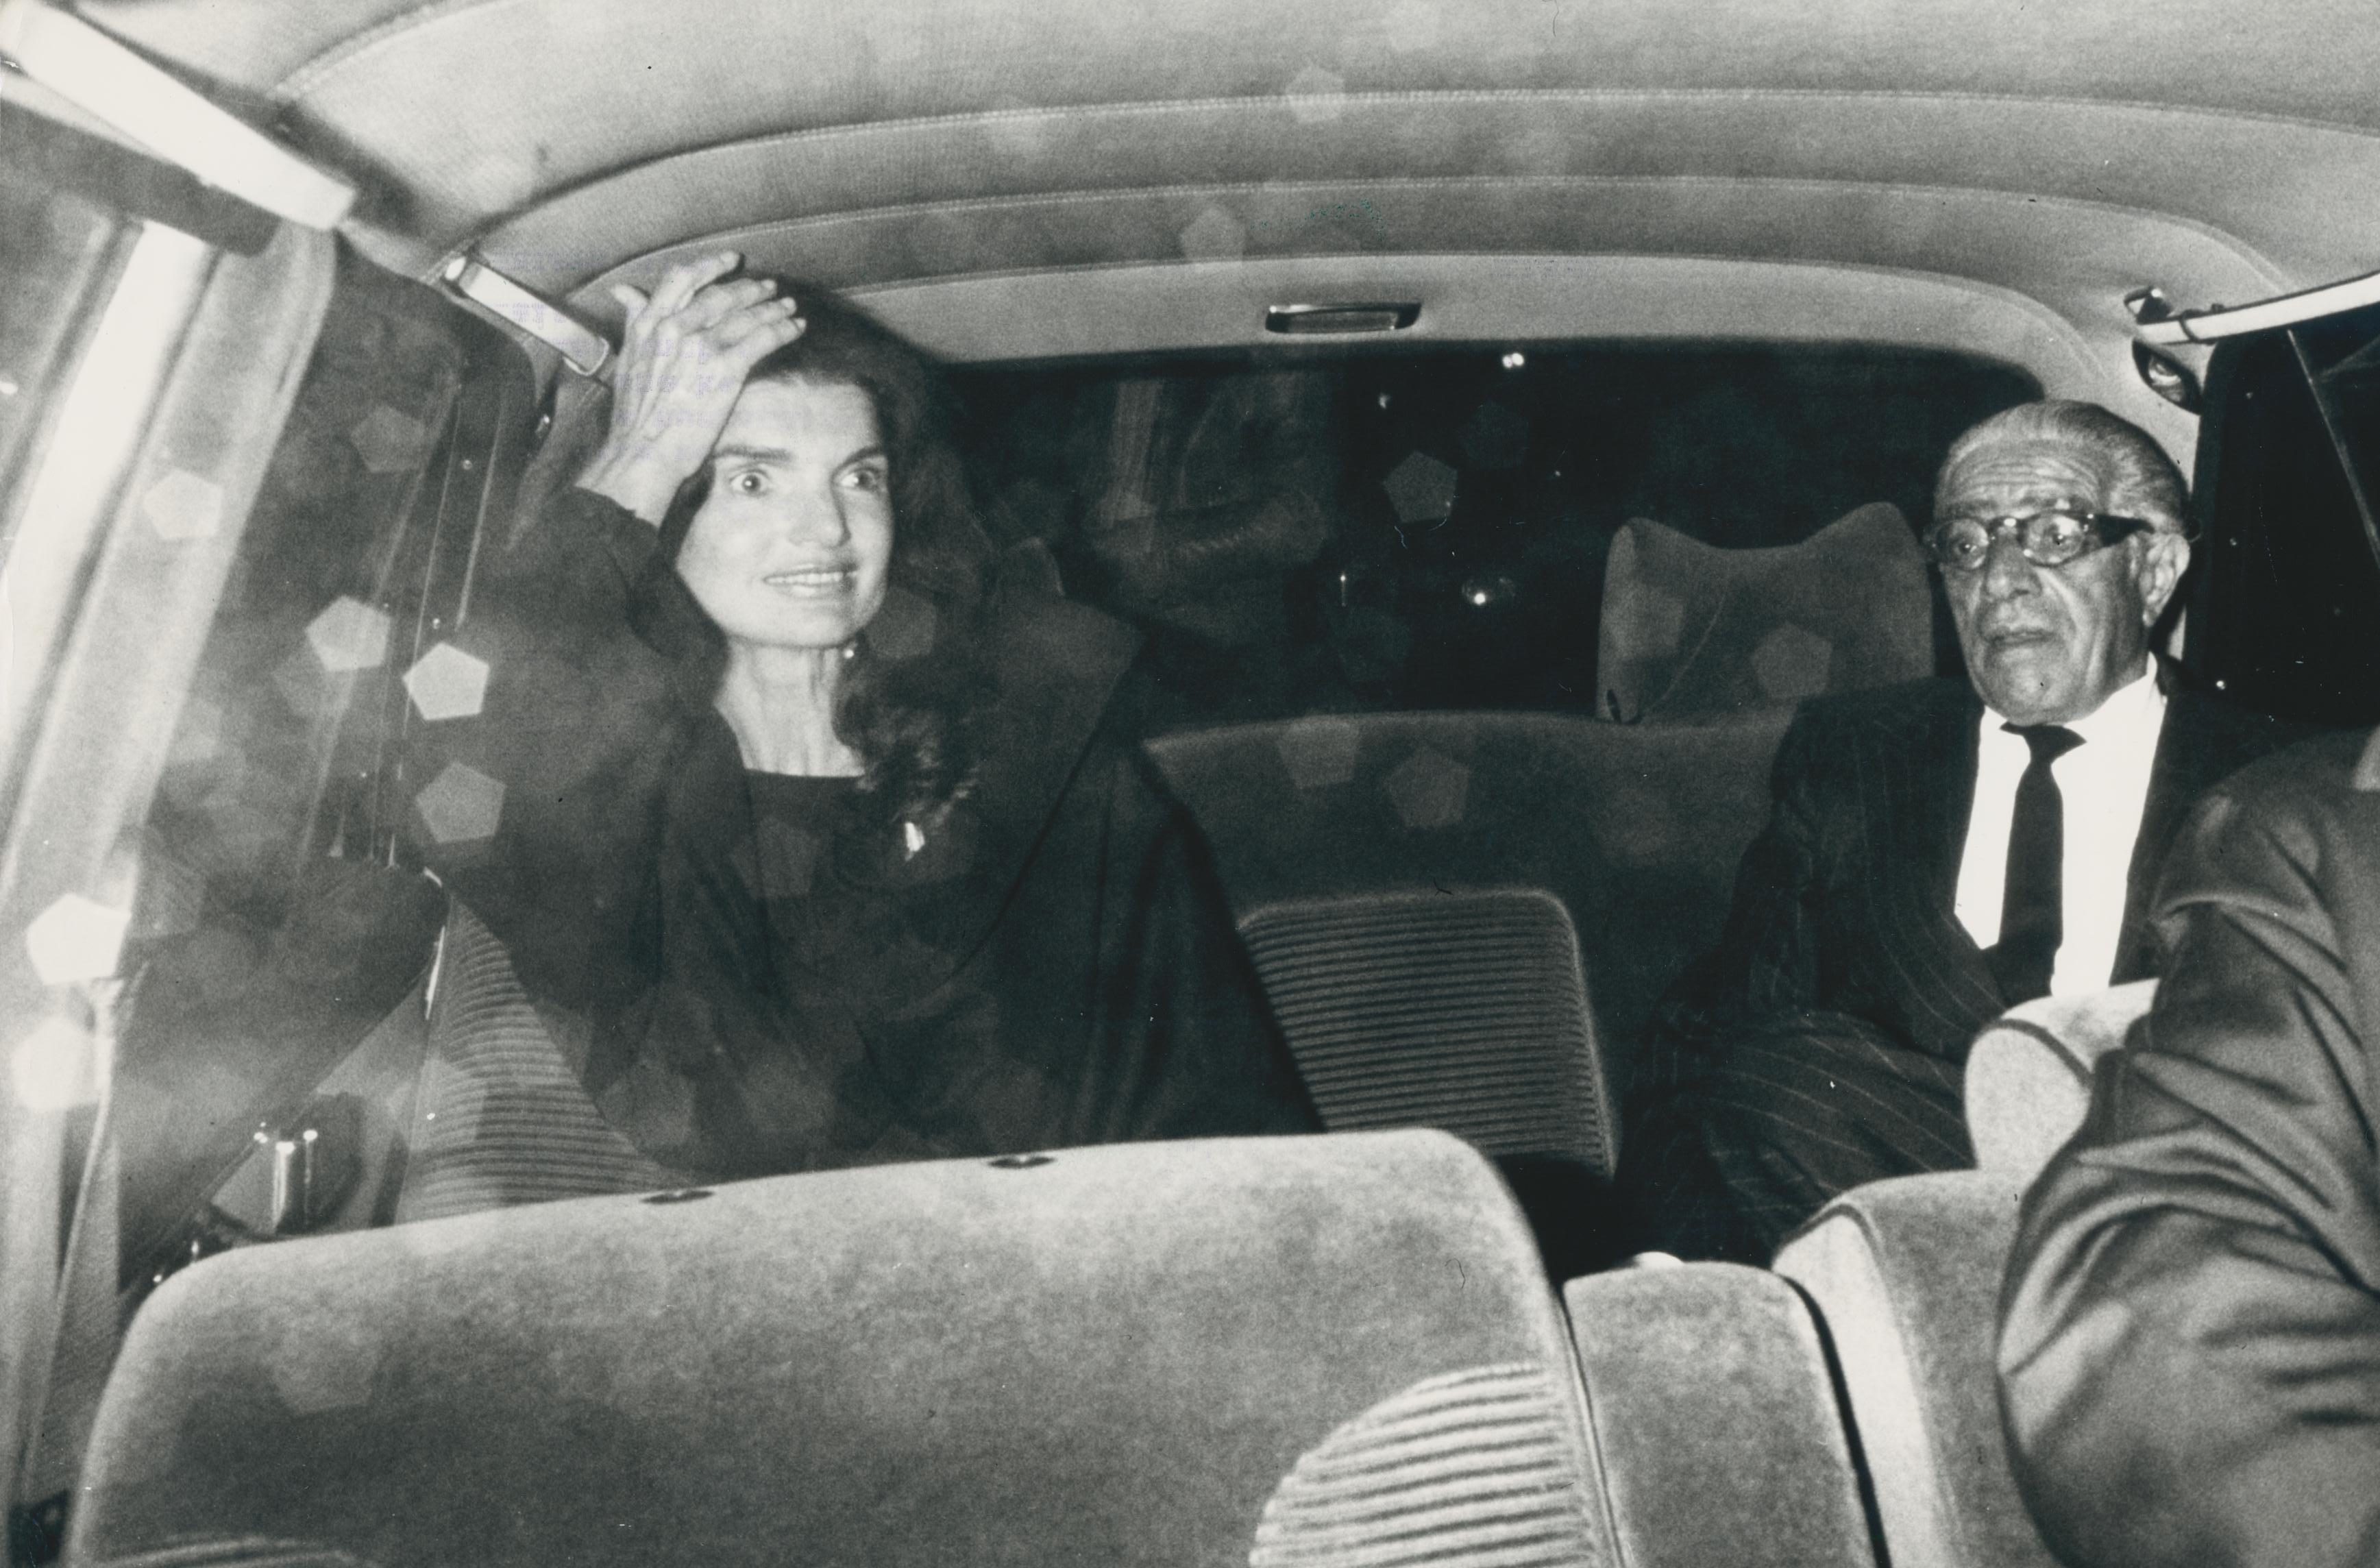 Unknown Black and White Photograph – Jackie Kennedy in Car, Paris, Frankreich, 20 x 30, 5 cm, 1974